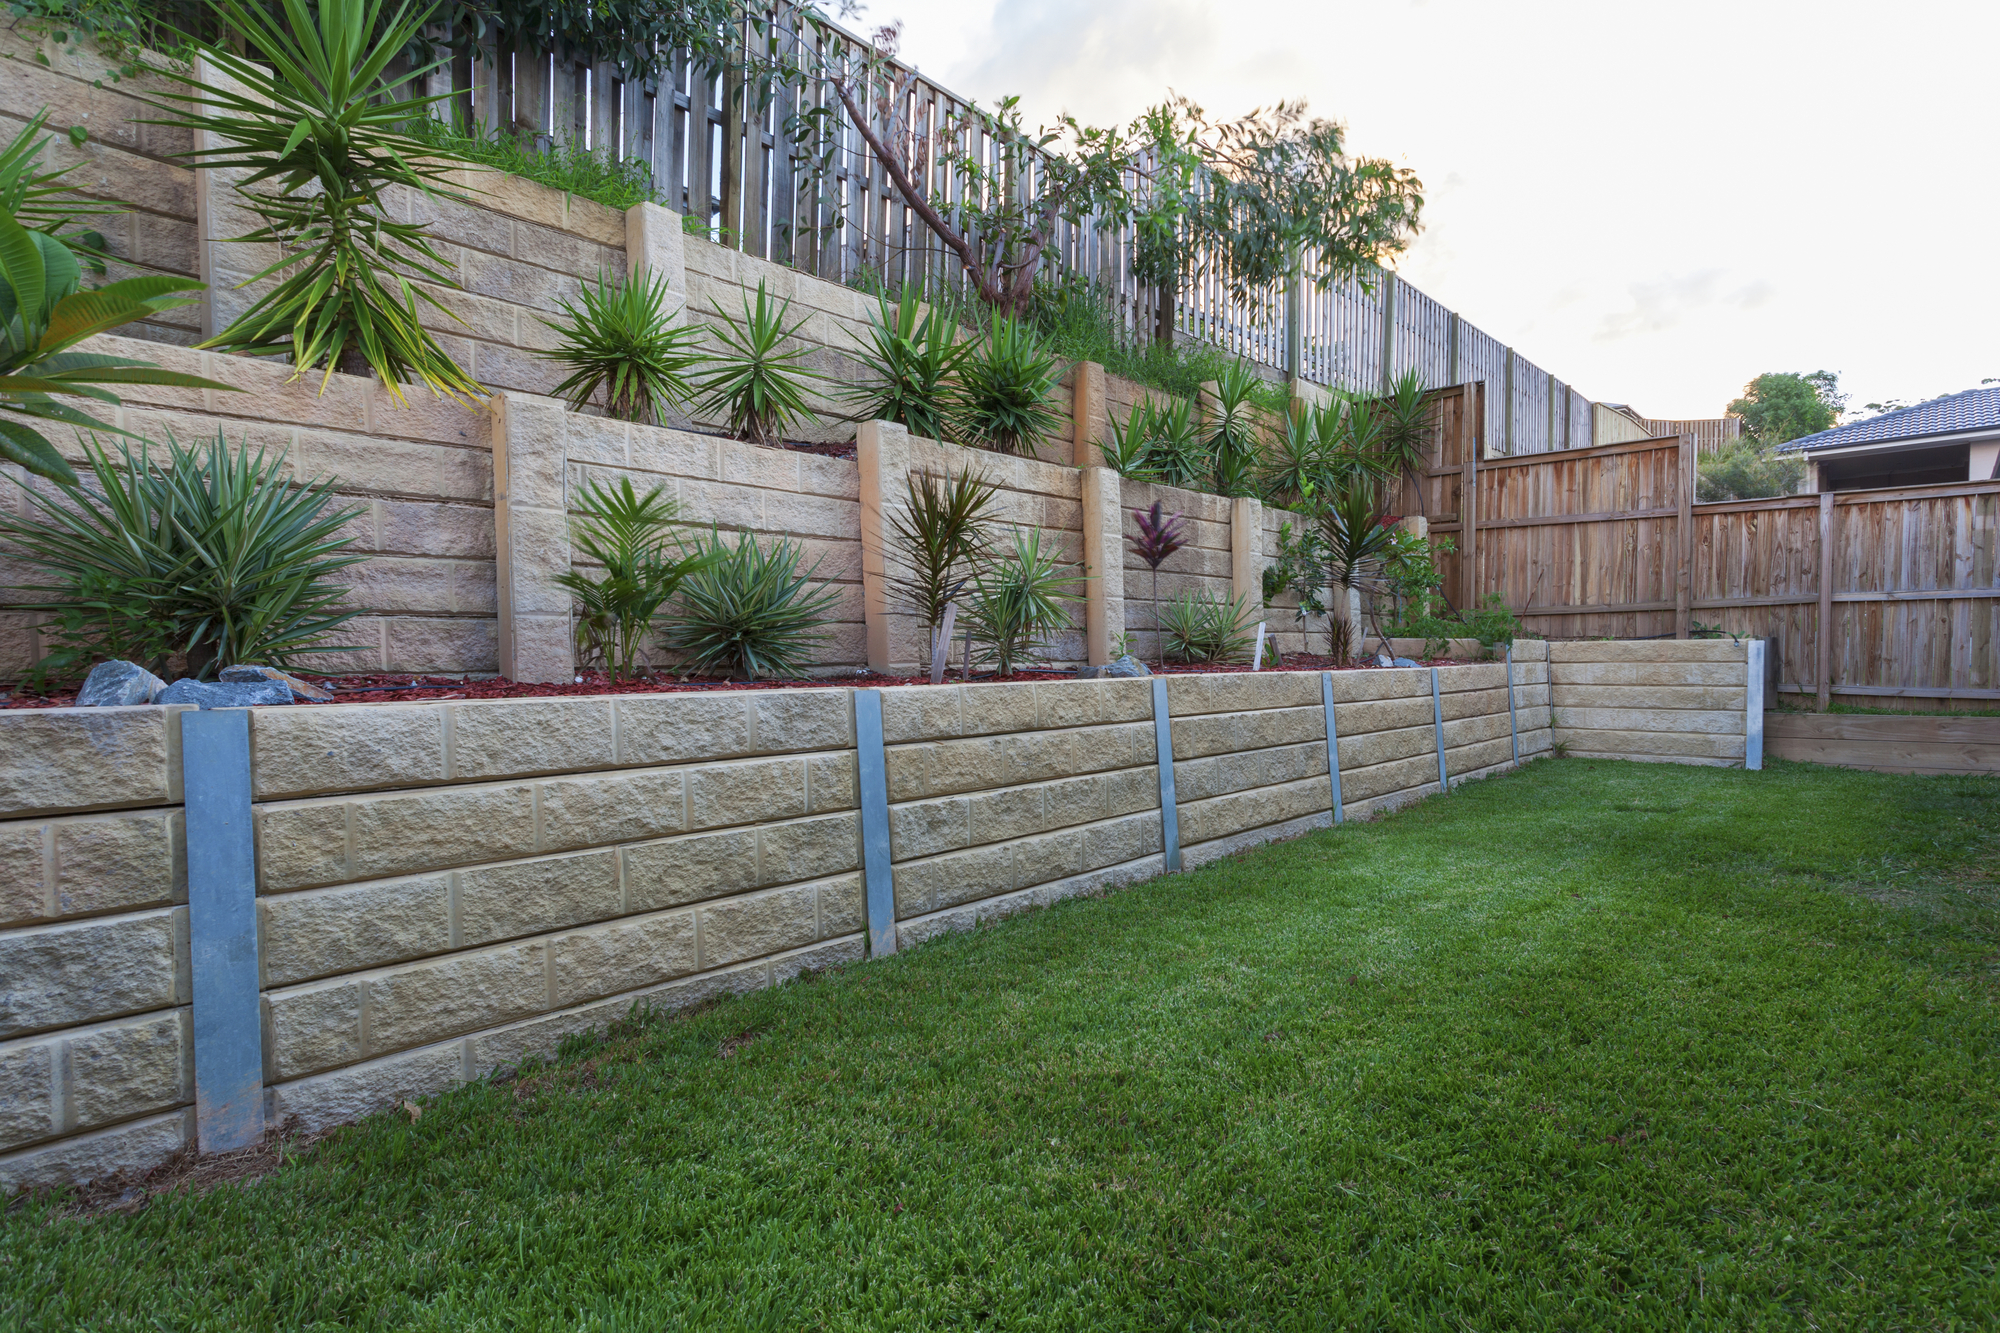 Prodan LLC is a Troutdale retaining wall construction company